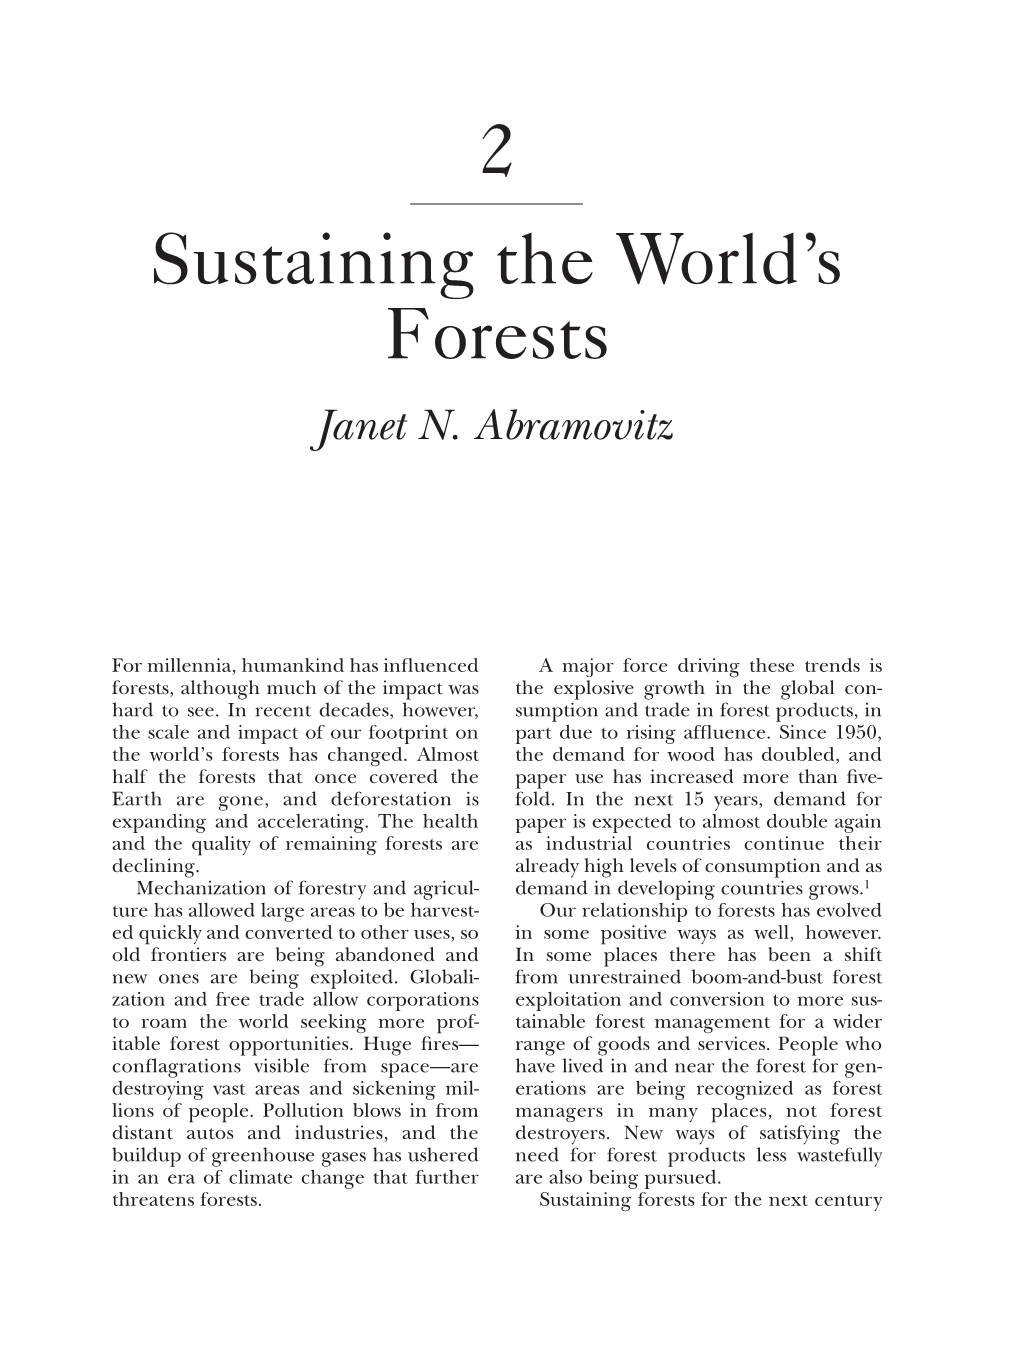 Sustaining the World's Forests